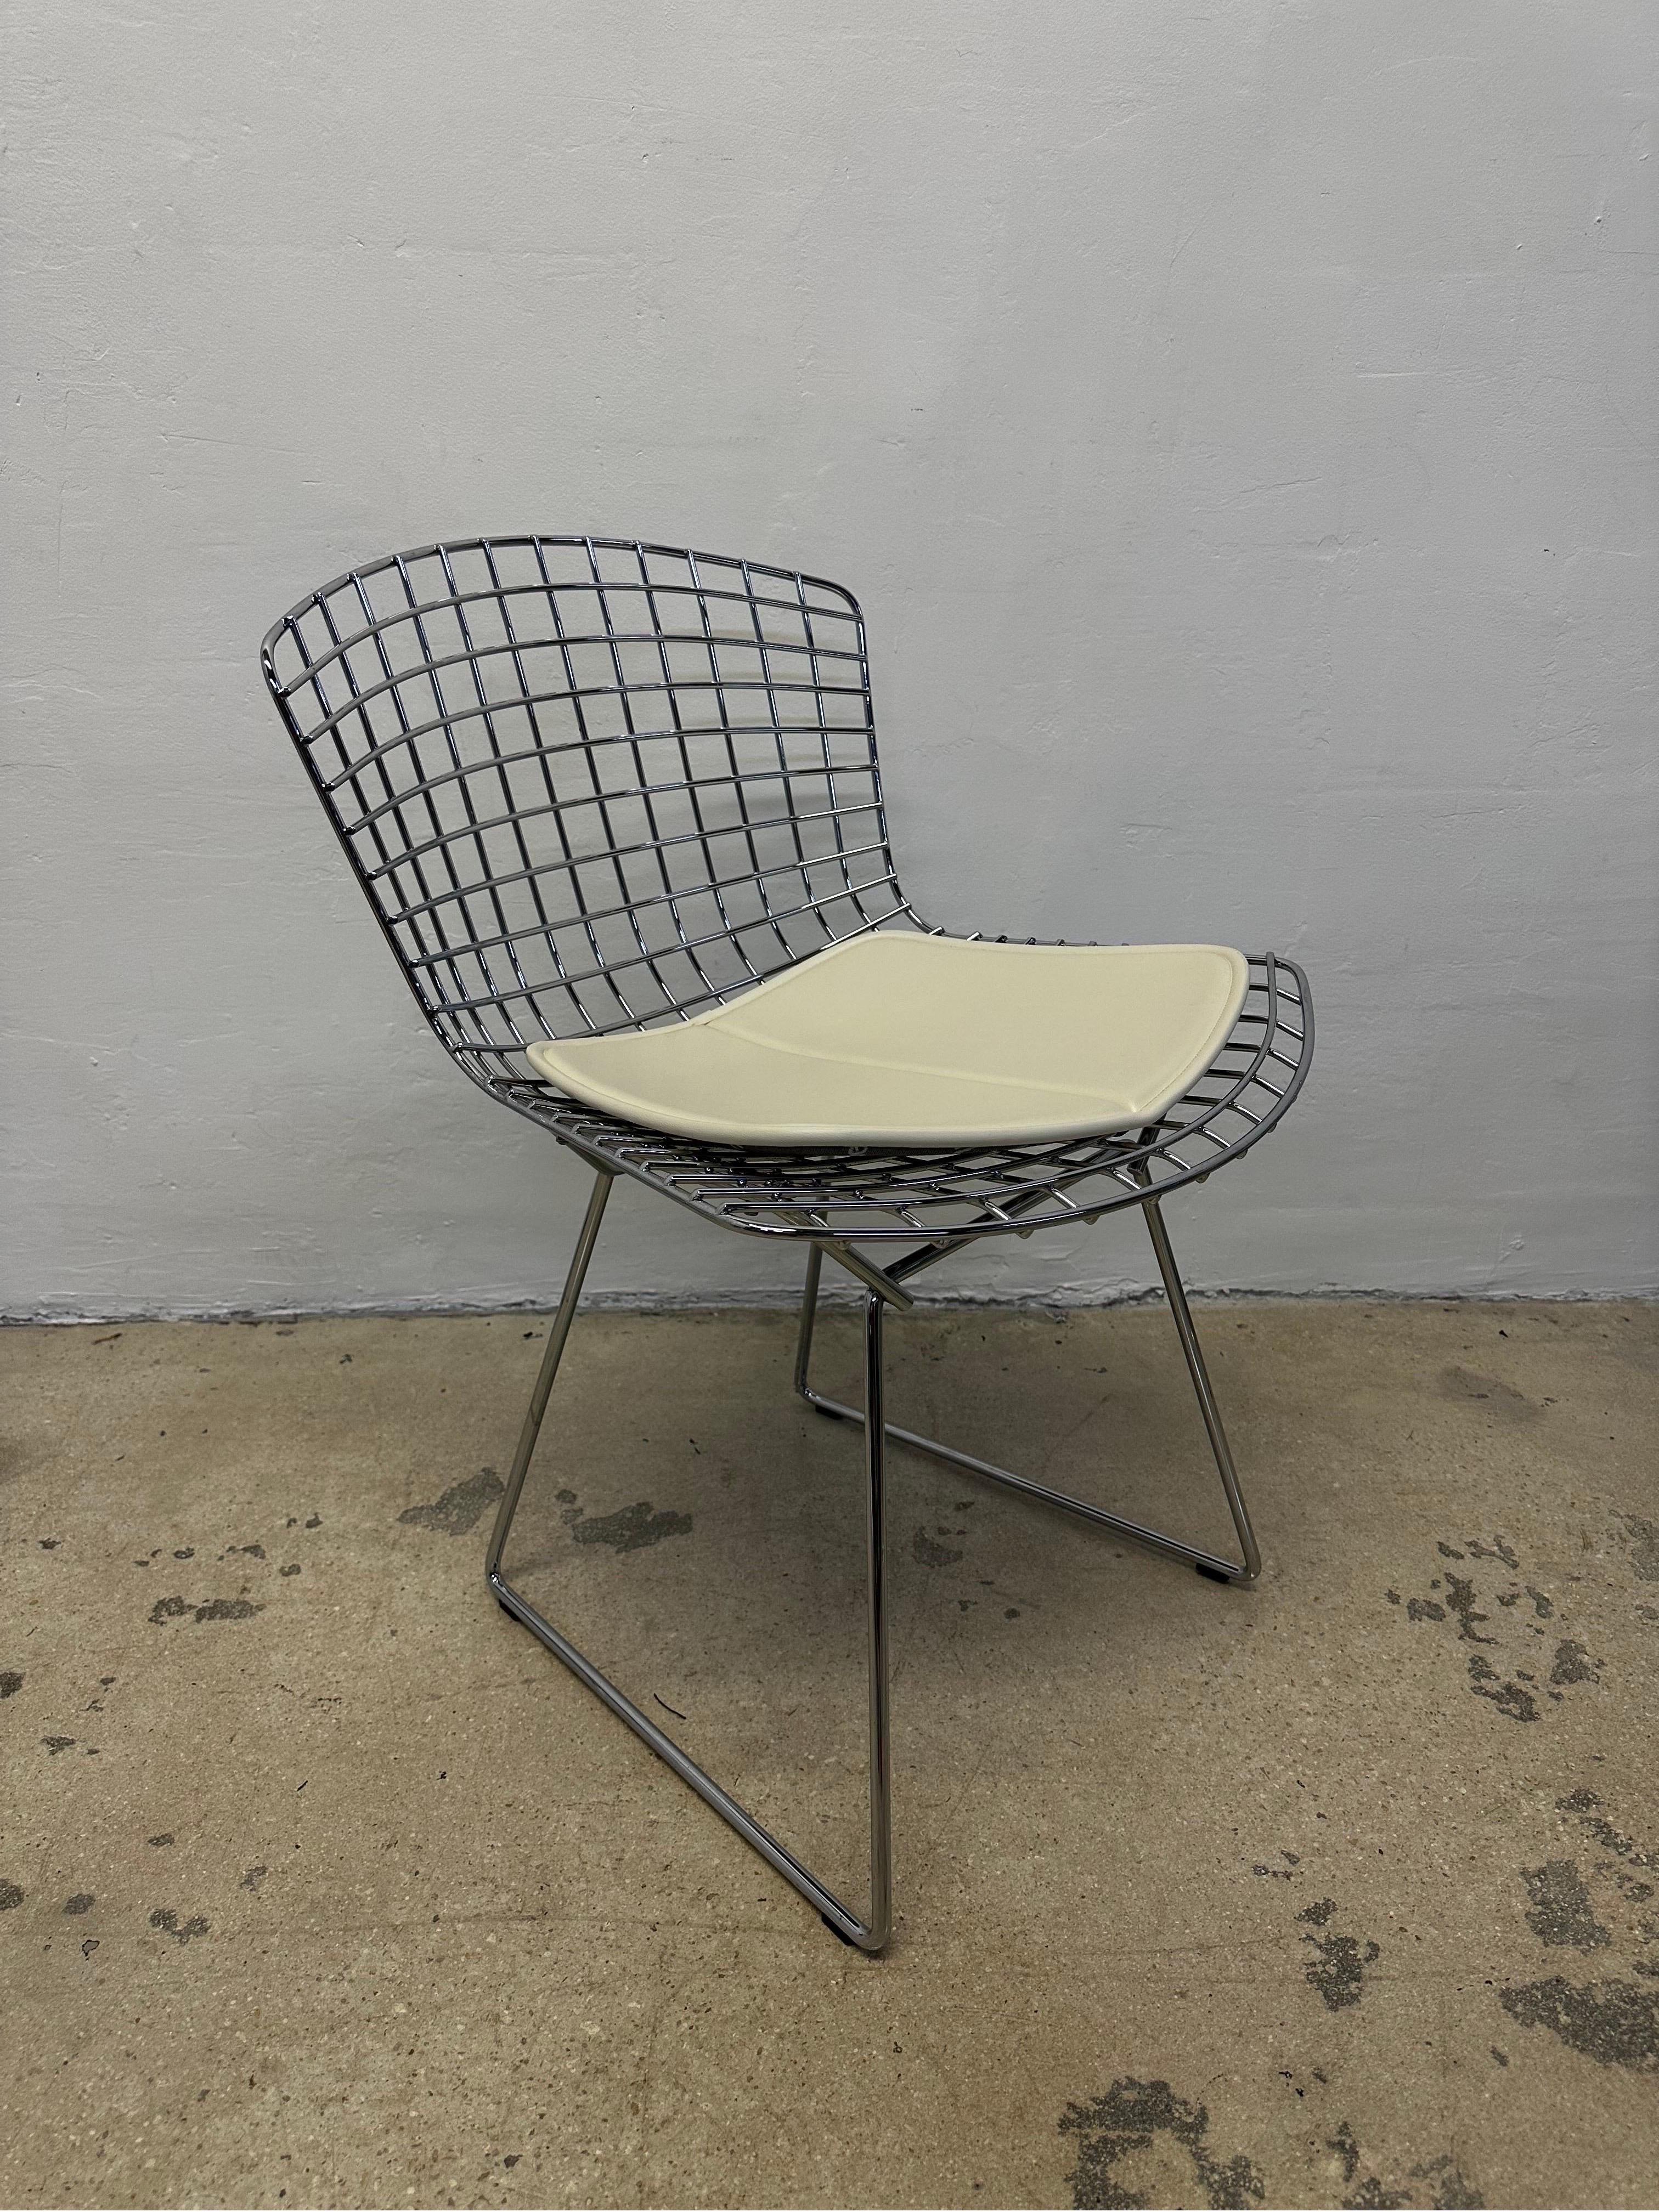 Set of six chrome wire dining chairs with cream colored leather cushions by Harry Bertoia for Knoll.